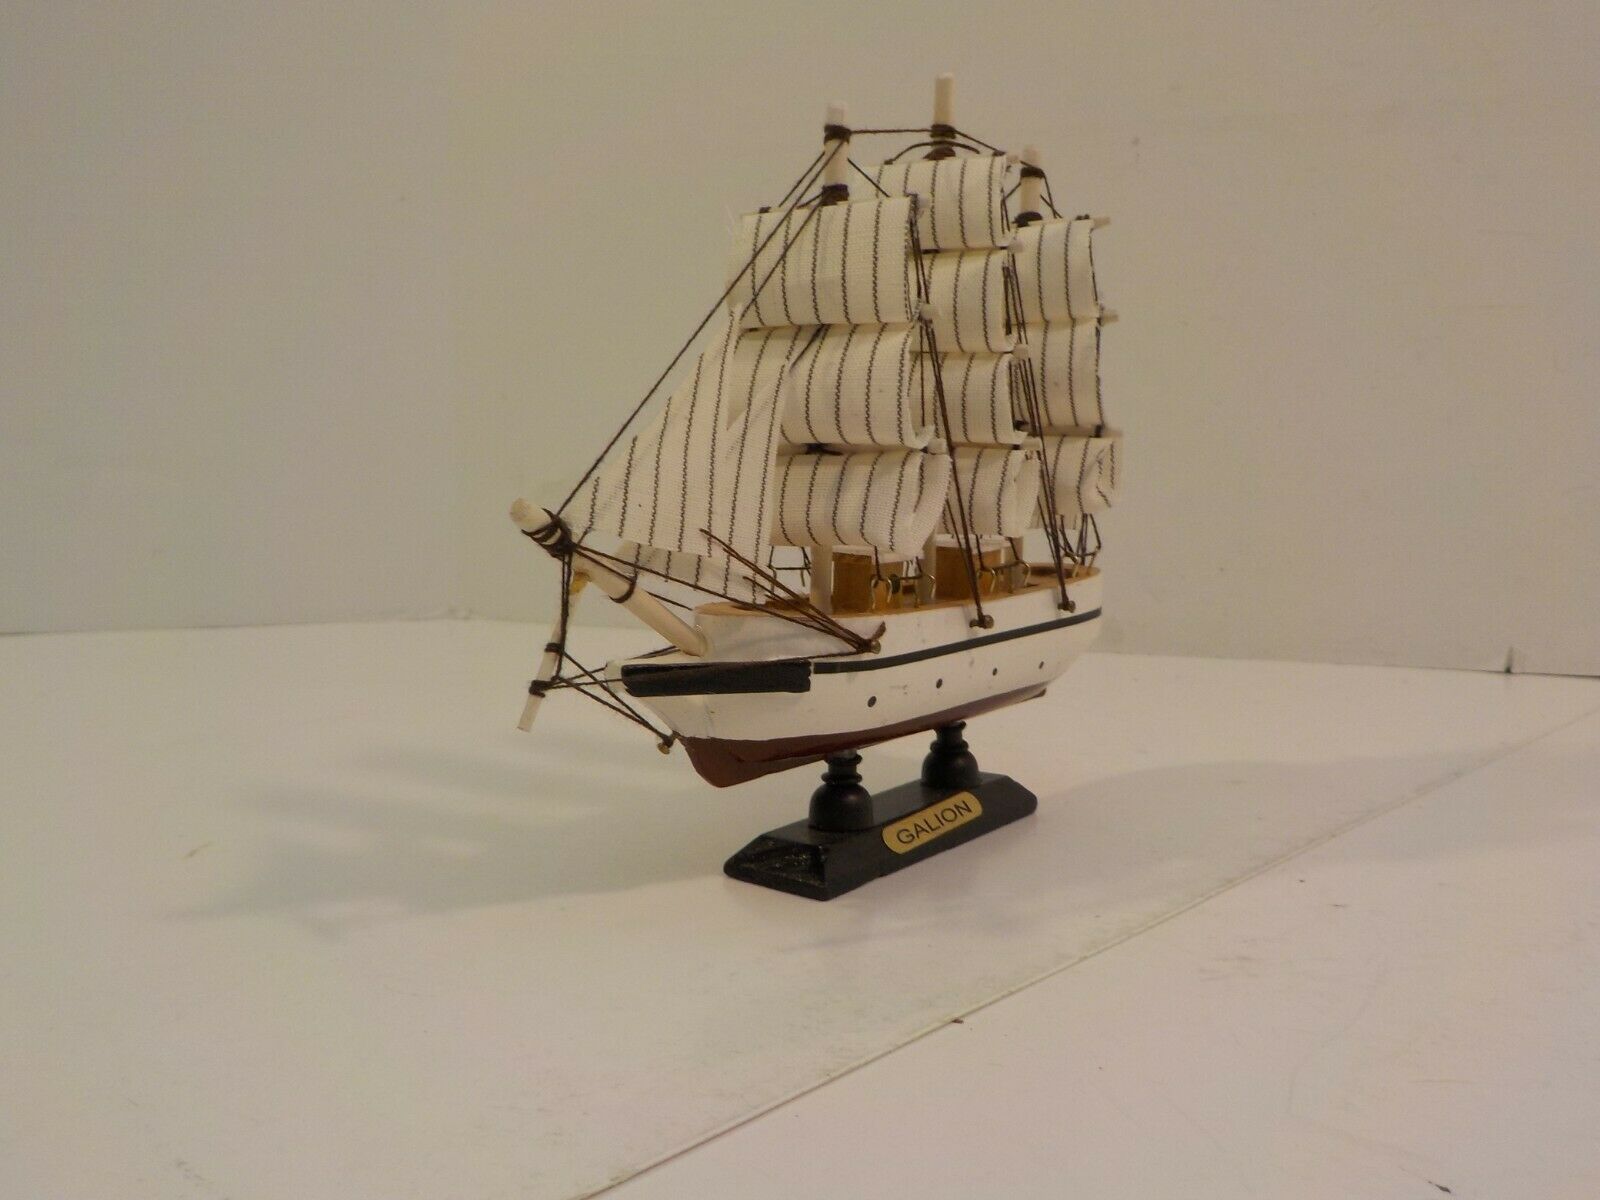 R Vintage Hand Crafted Wood Model Decor Nautical Sailboat Galion Miniature